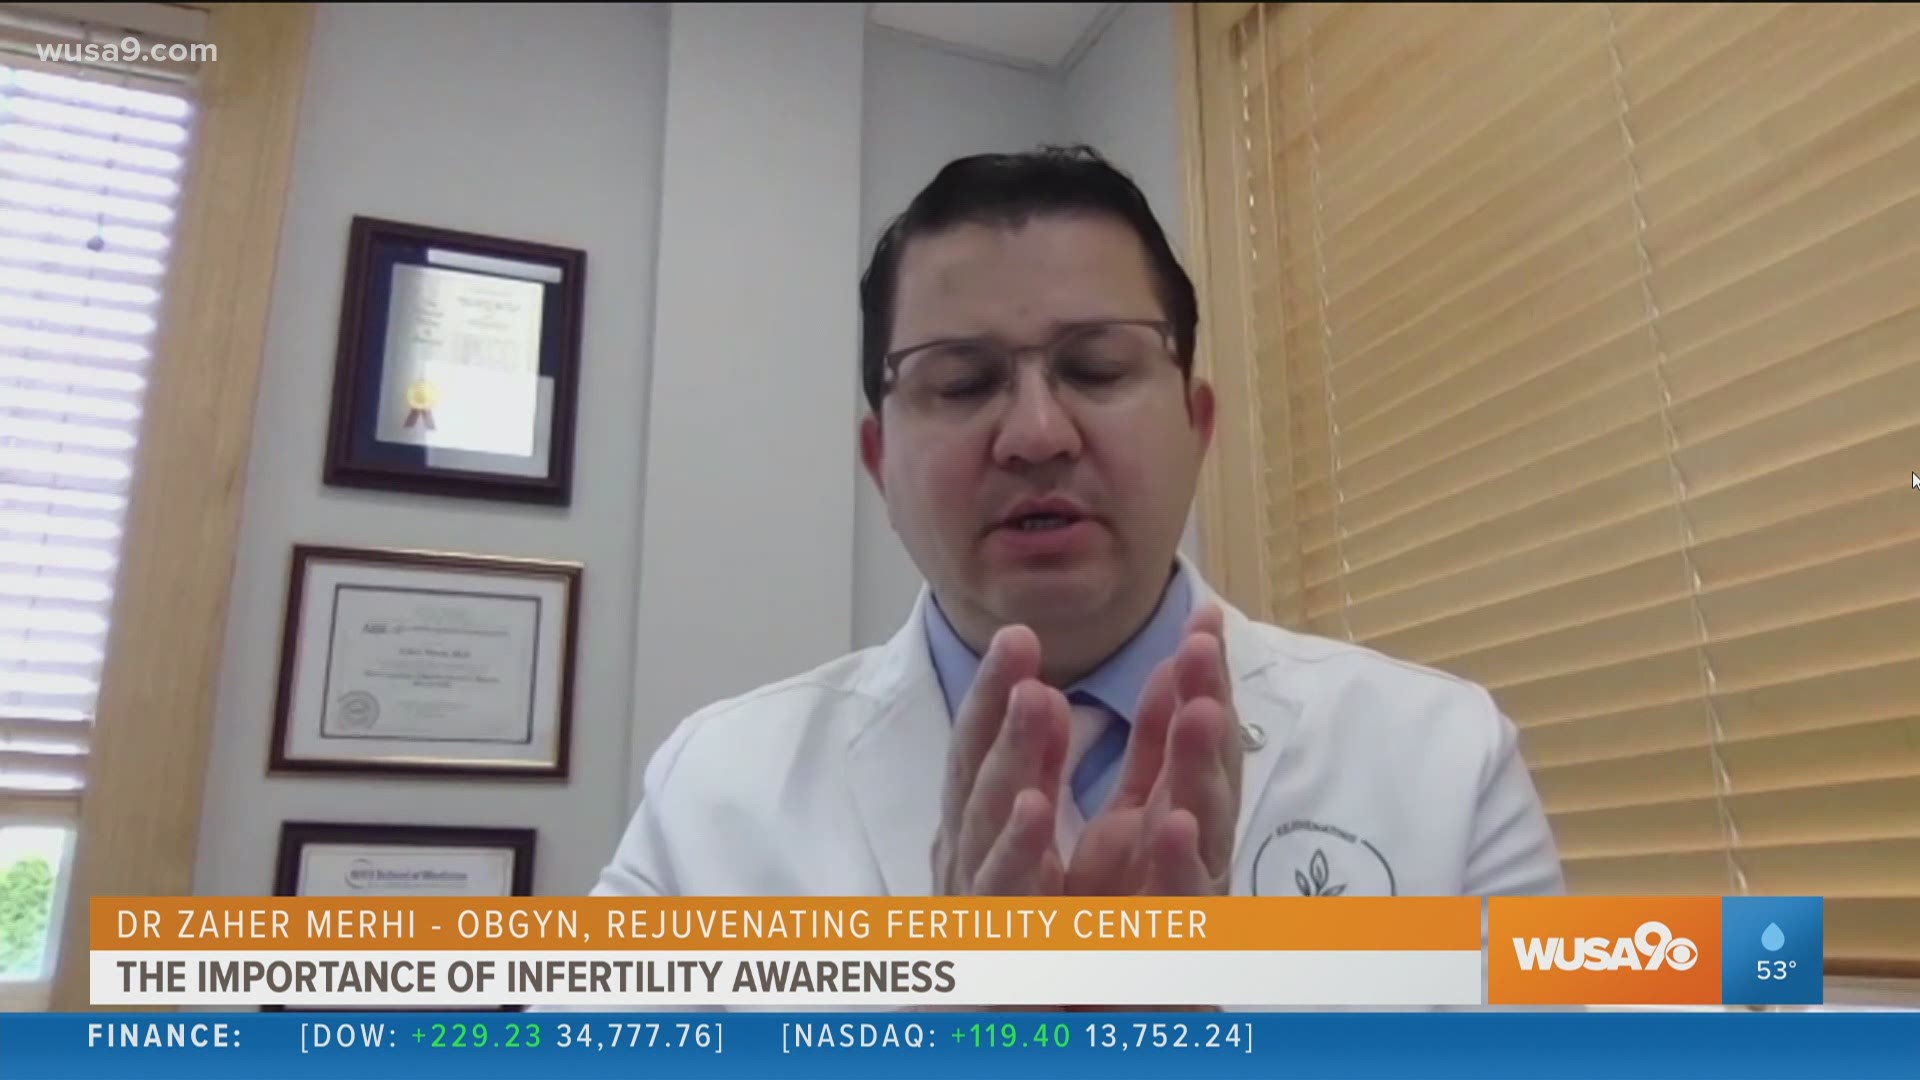 1 in 8 couples struggle with infertility, Dr. Zaher Merhi of the Rejuvenating Fertility Center explains why awareness is so important.